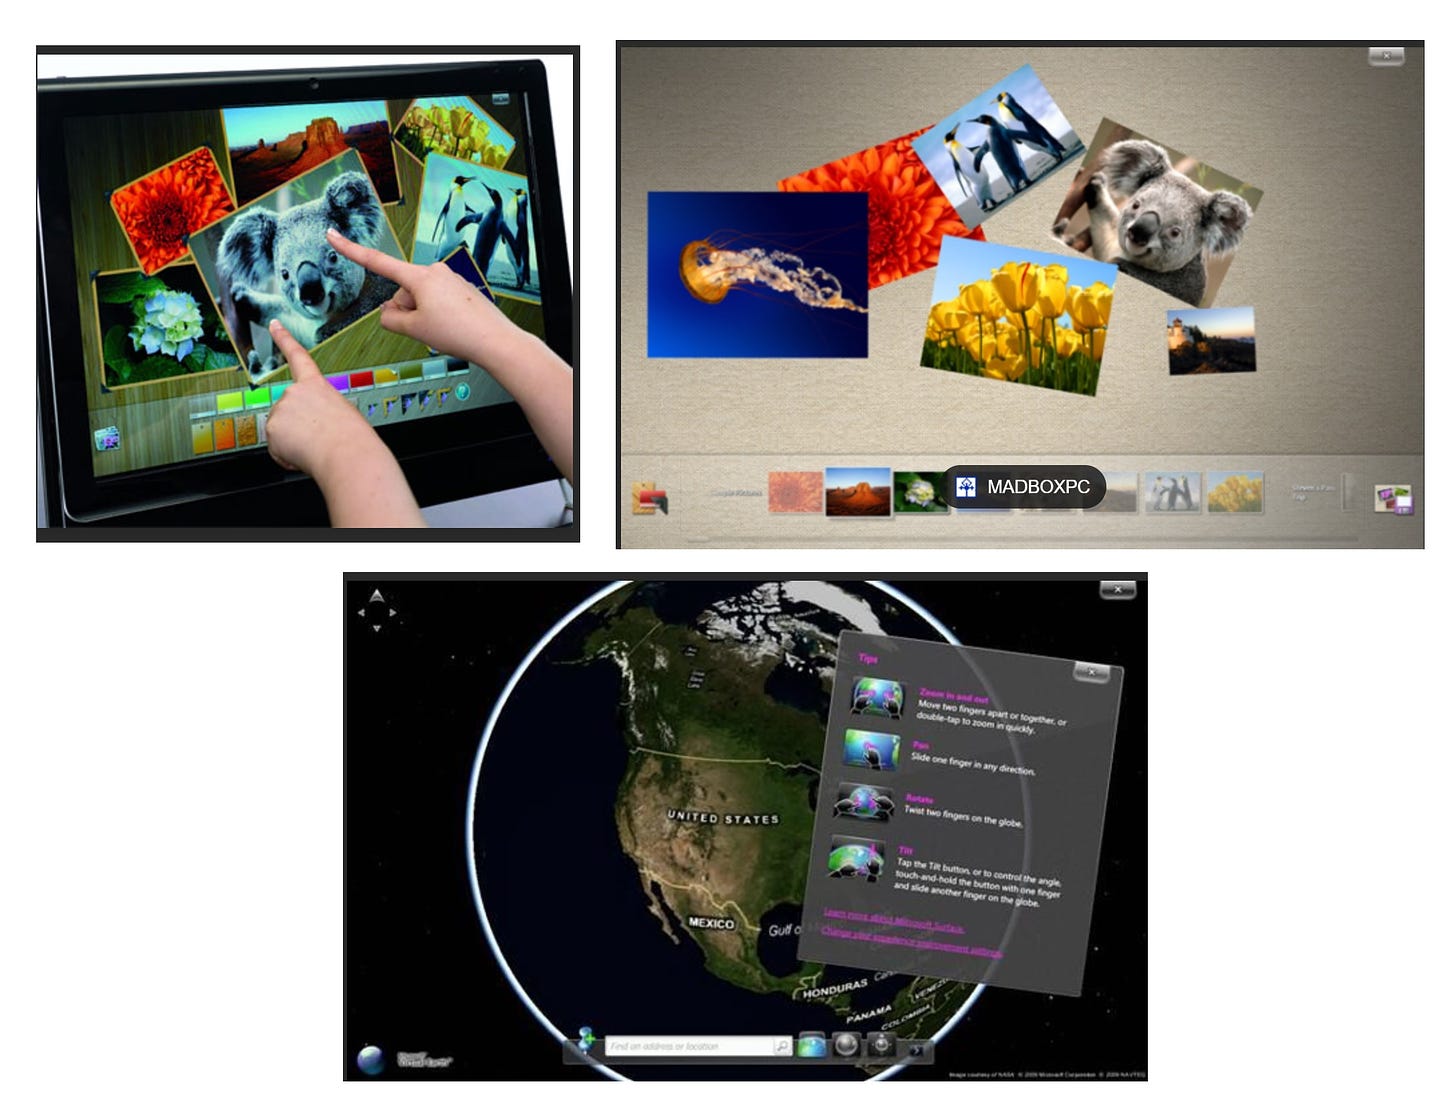 Three screen shots. 1) Photos being manipulated by multitouch, 2) a screen saver collection, 3) a map of the globe manipulated with touch.